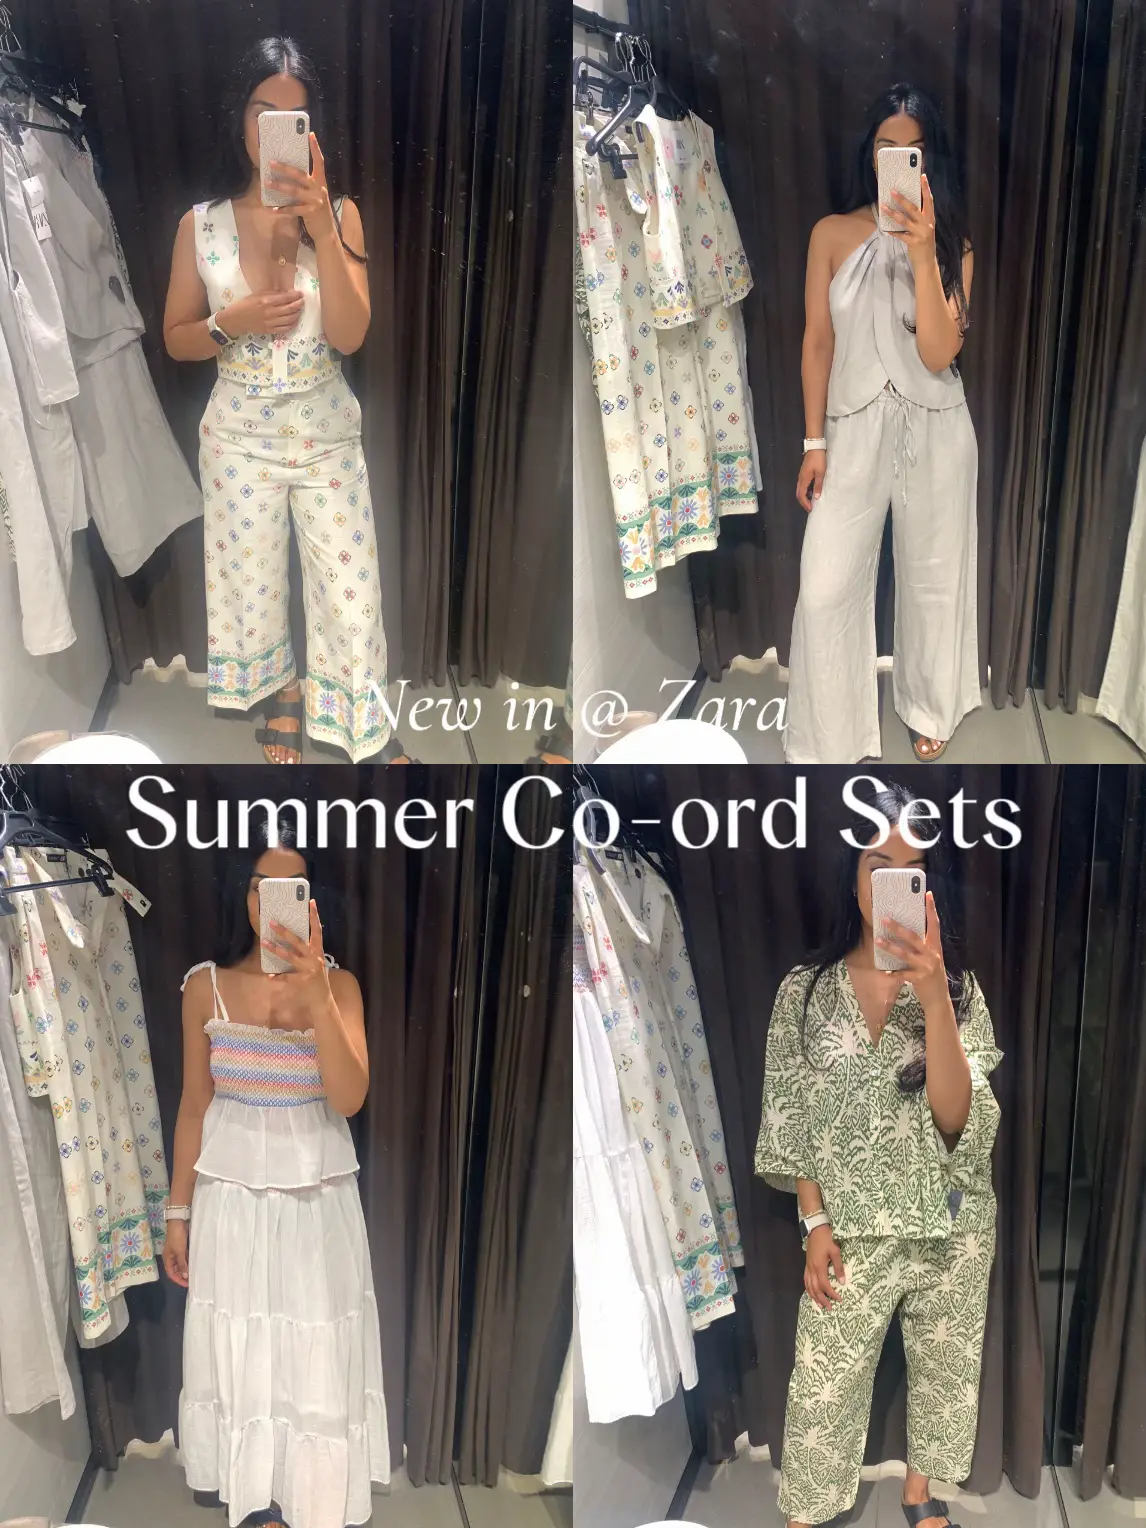 Summer Co-ord Sets, new in @ Zara, Gallery posted by Kavveeta